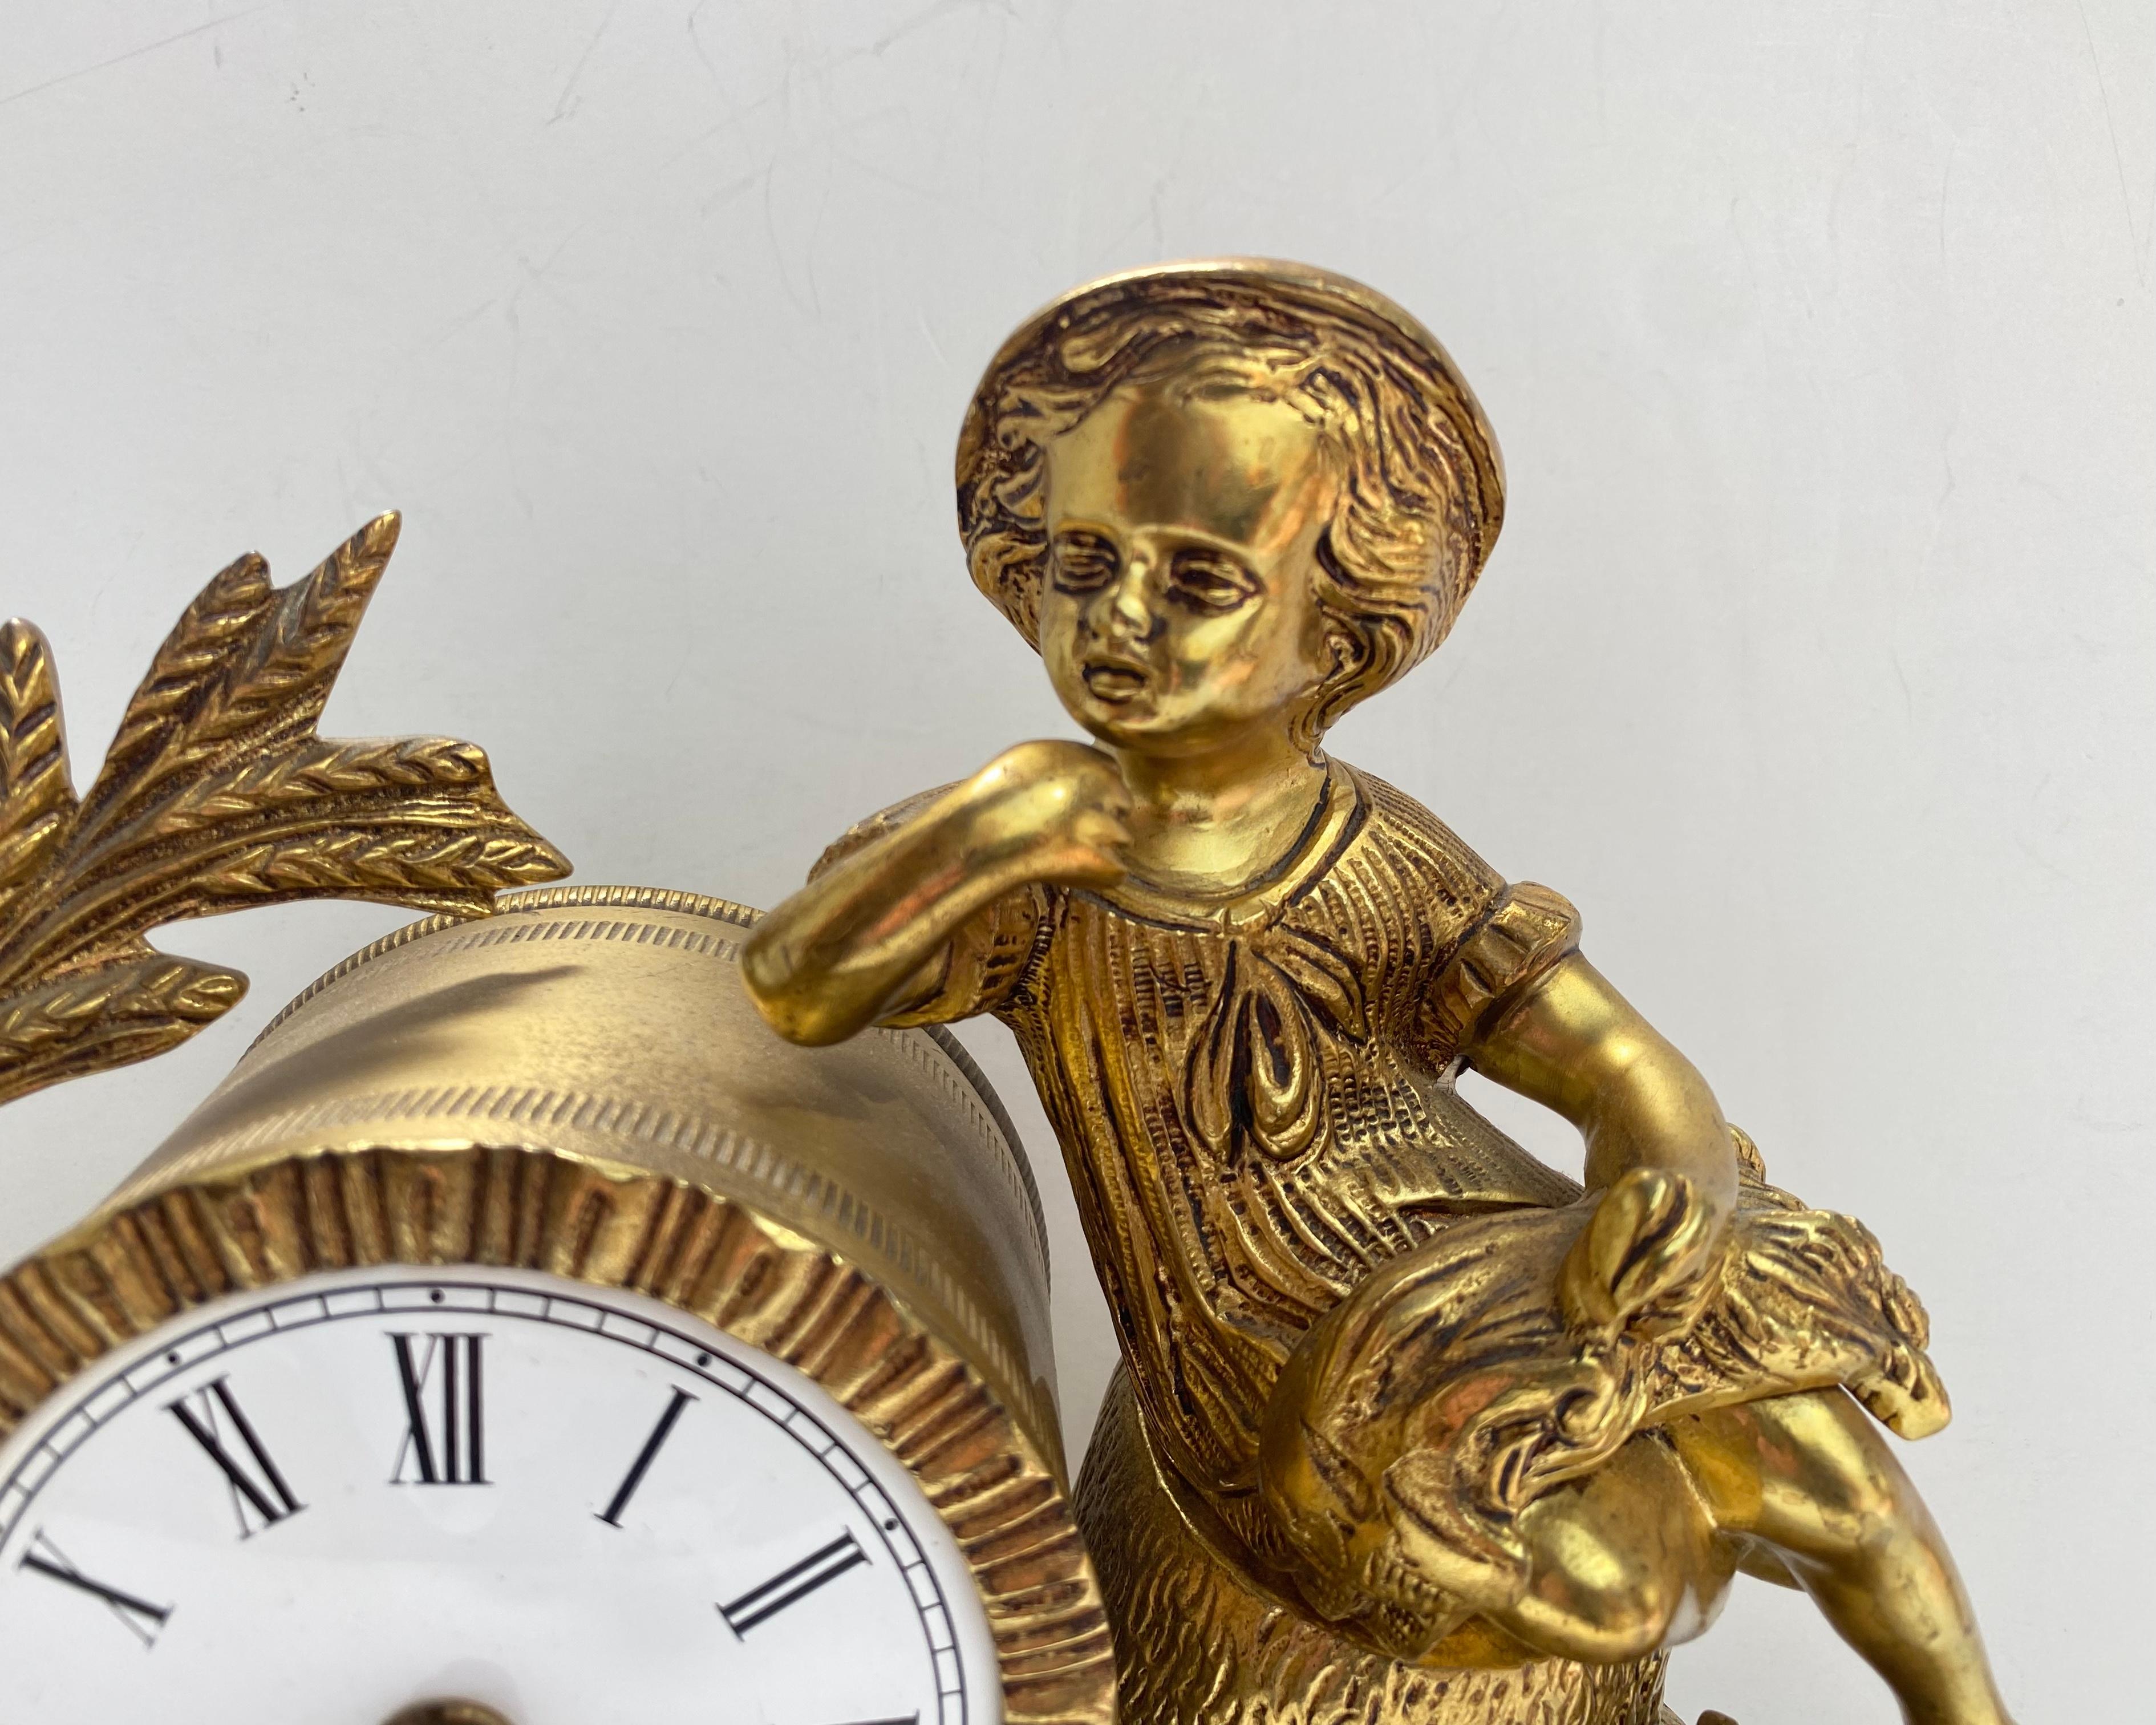 Victorian style gilded spelter figural mantel clock from the Mid -20th century.
Featuring a well-cast bronze figure of a young boy / child dressed in Victorian era garment, sheaves of wheat and scythe, heavily decorated Rocaille style design,